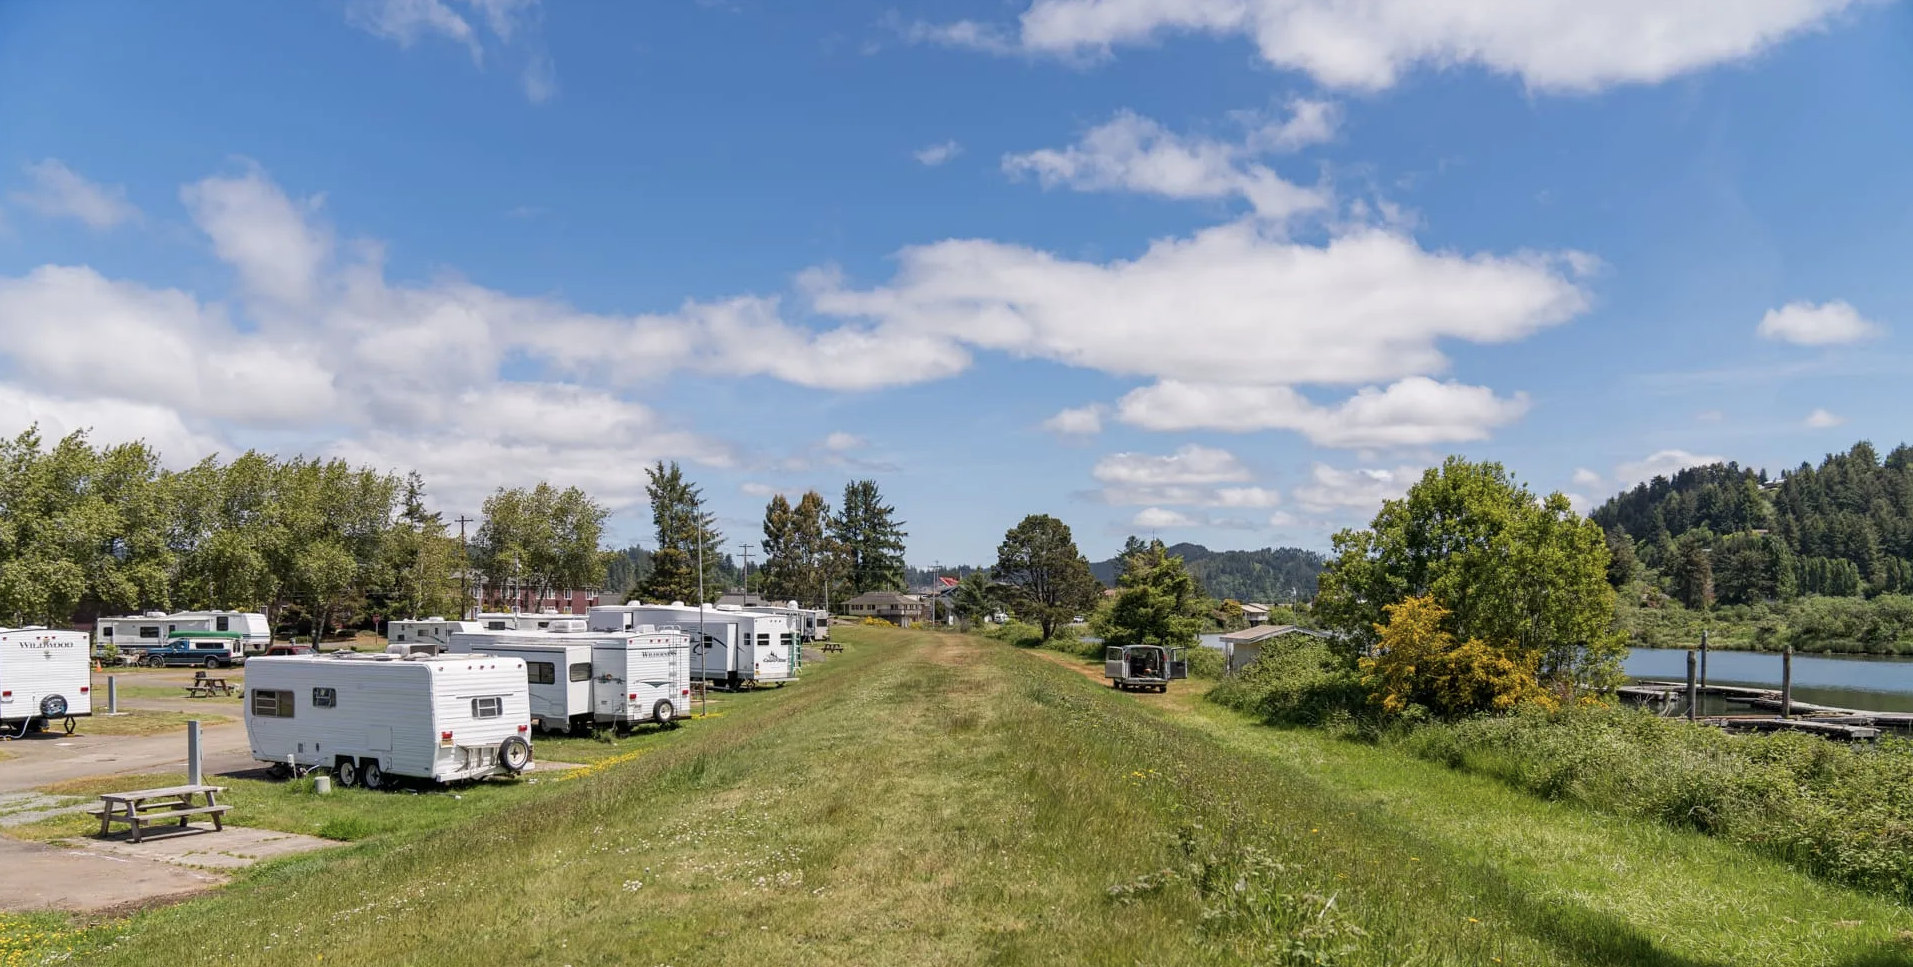 RVs parked on the banks of a straight Levy.